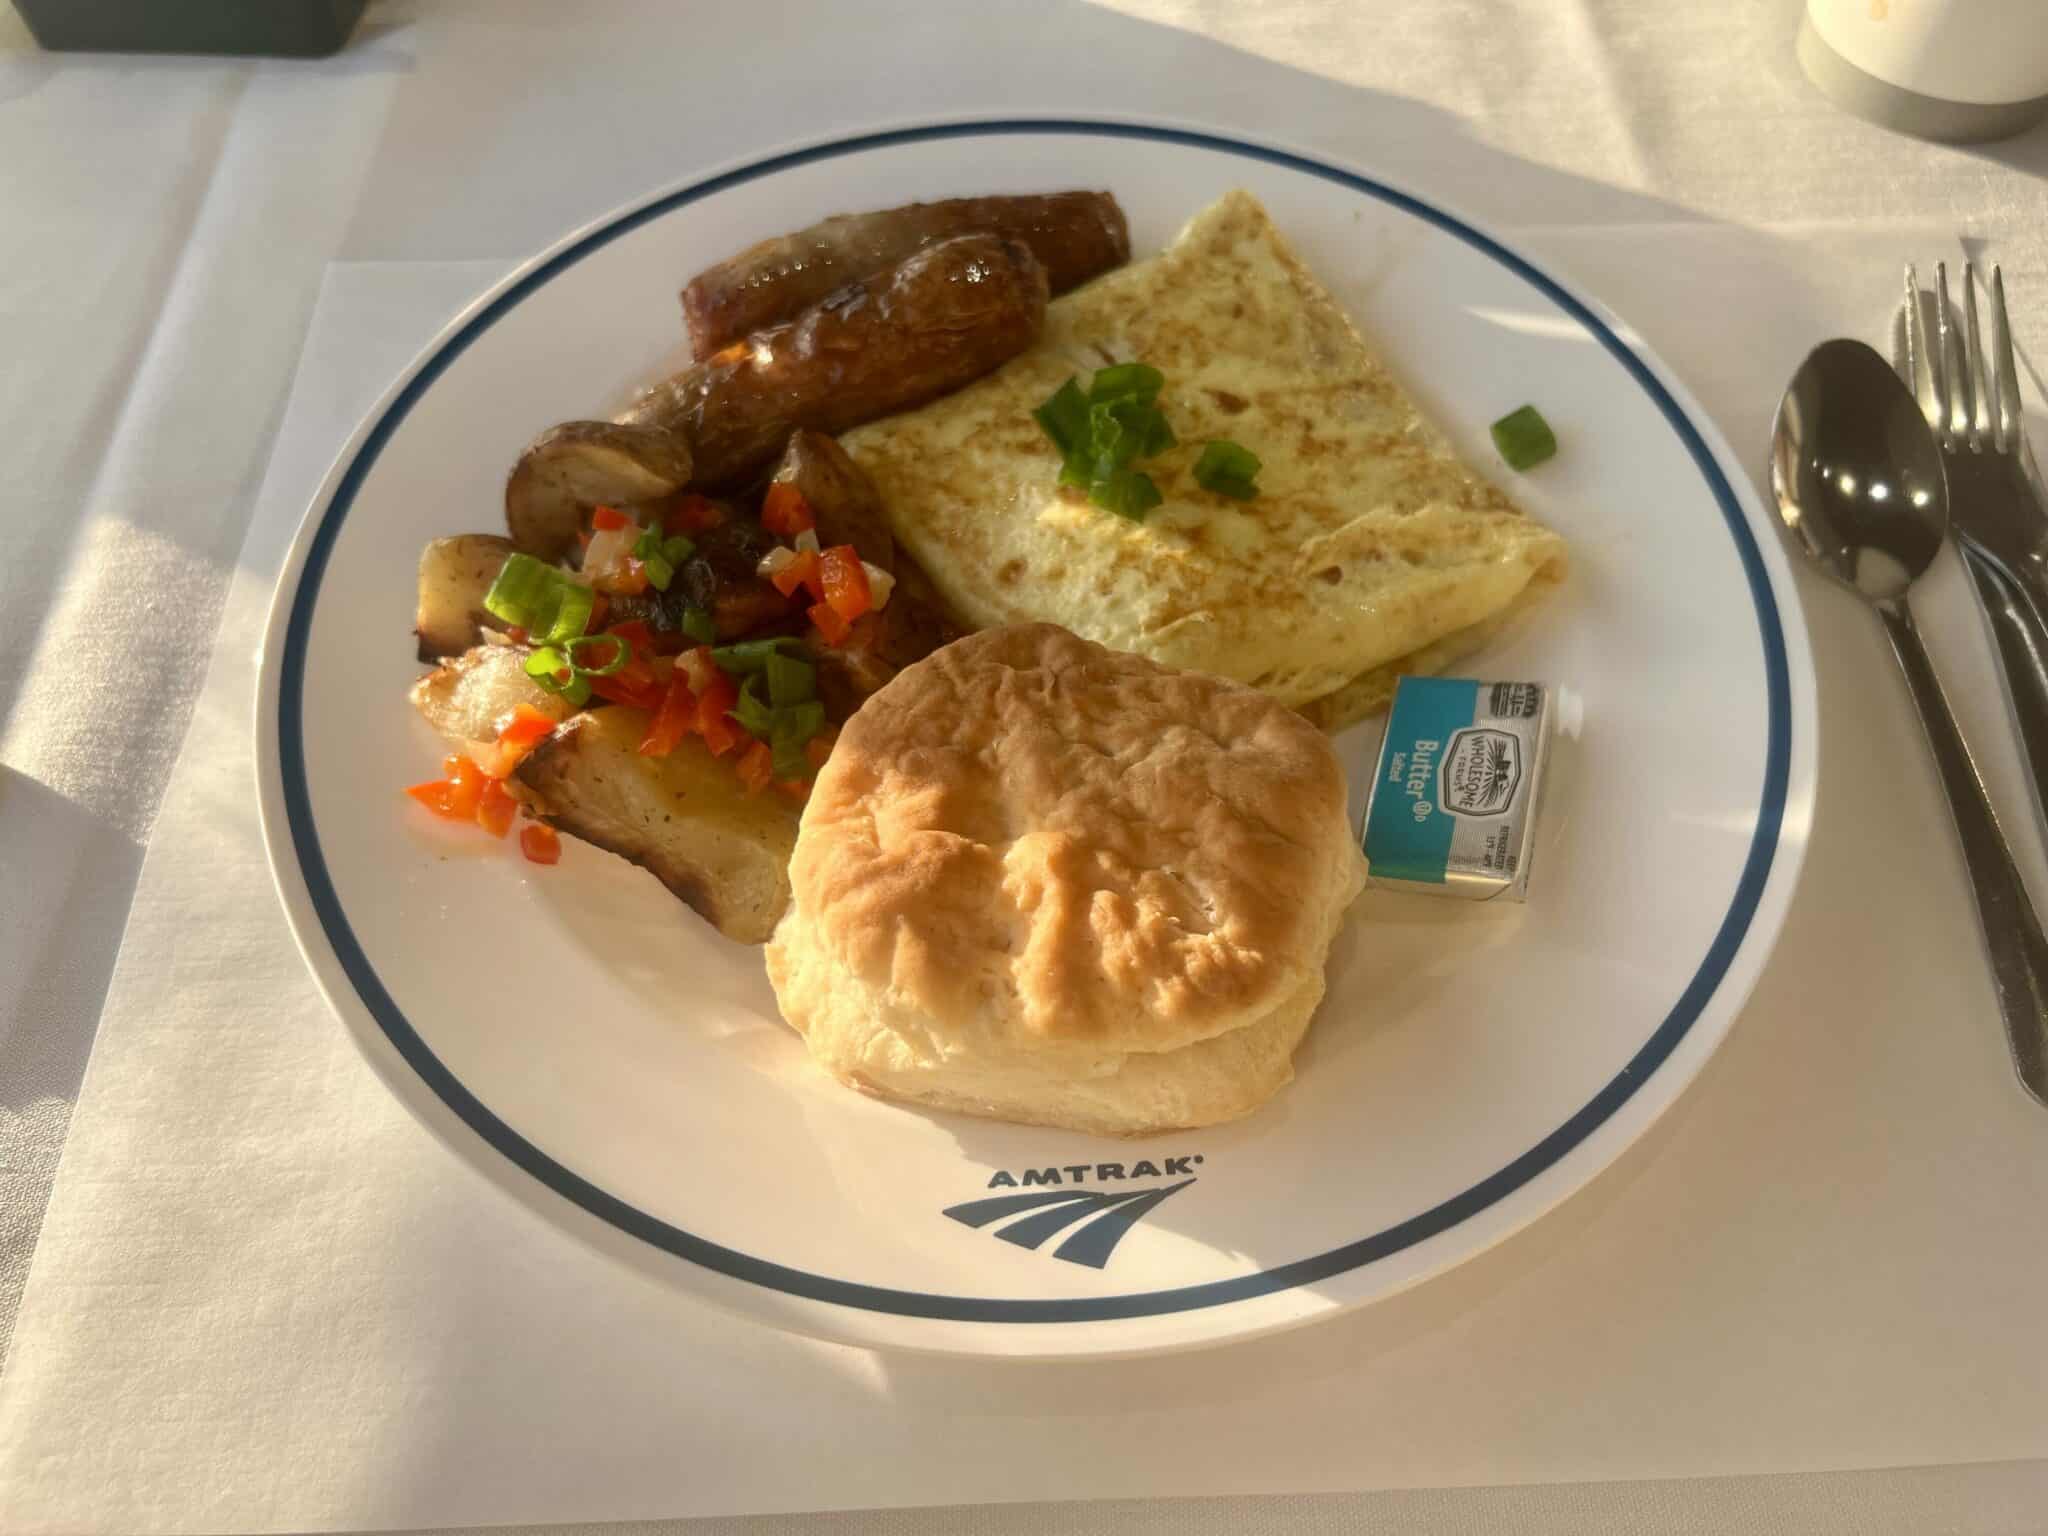 An Amtrak omelet breakfast with biscuit and potatoes.